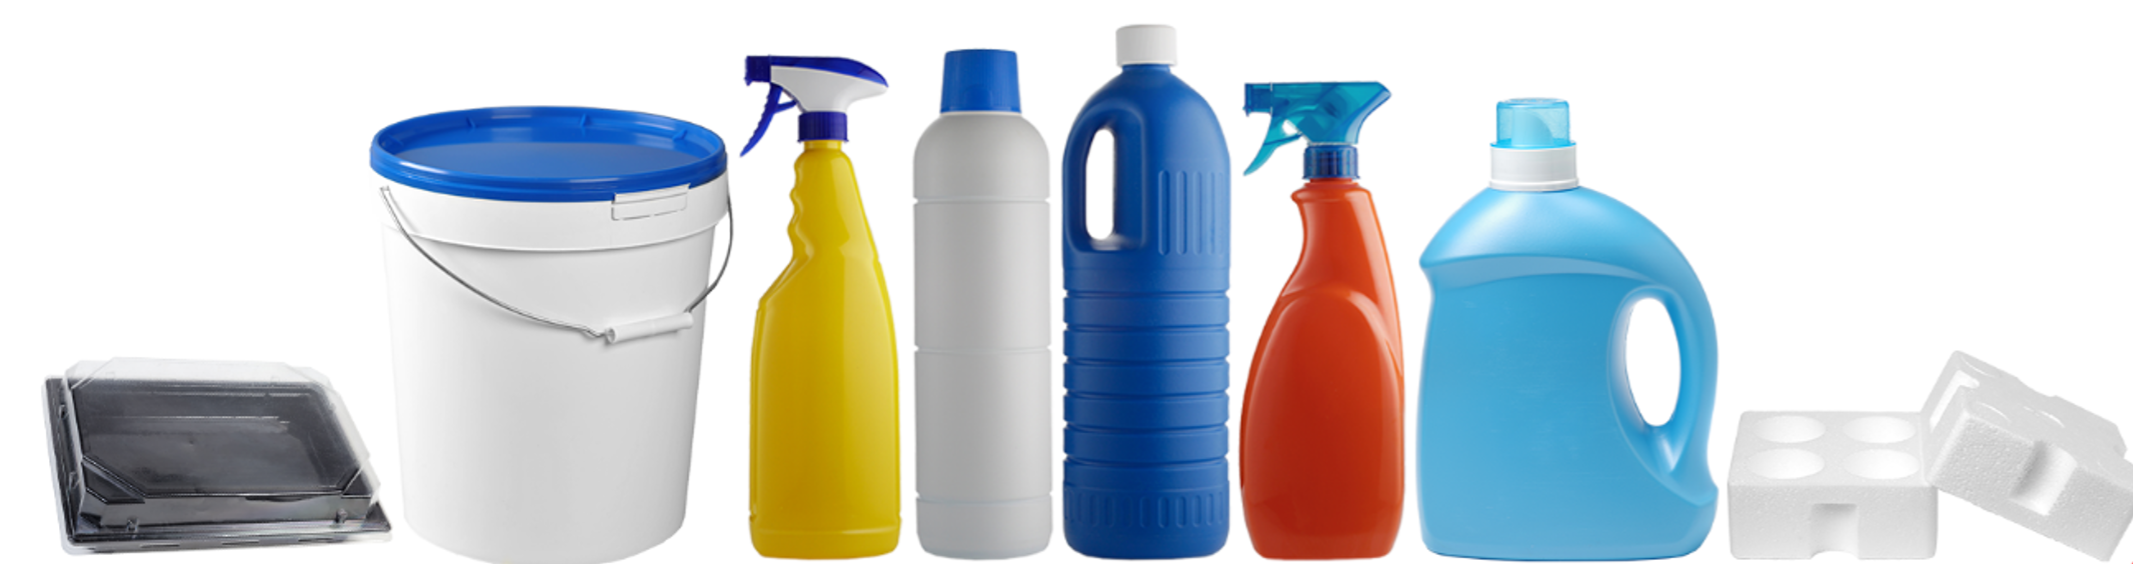 This is a photo realistic image of a collection of cleaning supplies on a white background. The cleaning supplies include a blue bucket with a white handle, a gray dustpan, a yellow spray bottle, a blue spray bottle, an orange spray bottle, a blue detergent bottle, and a white sponge.